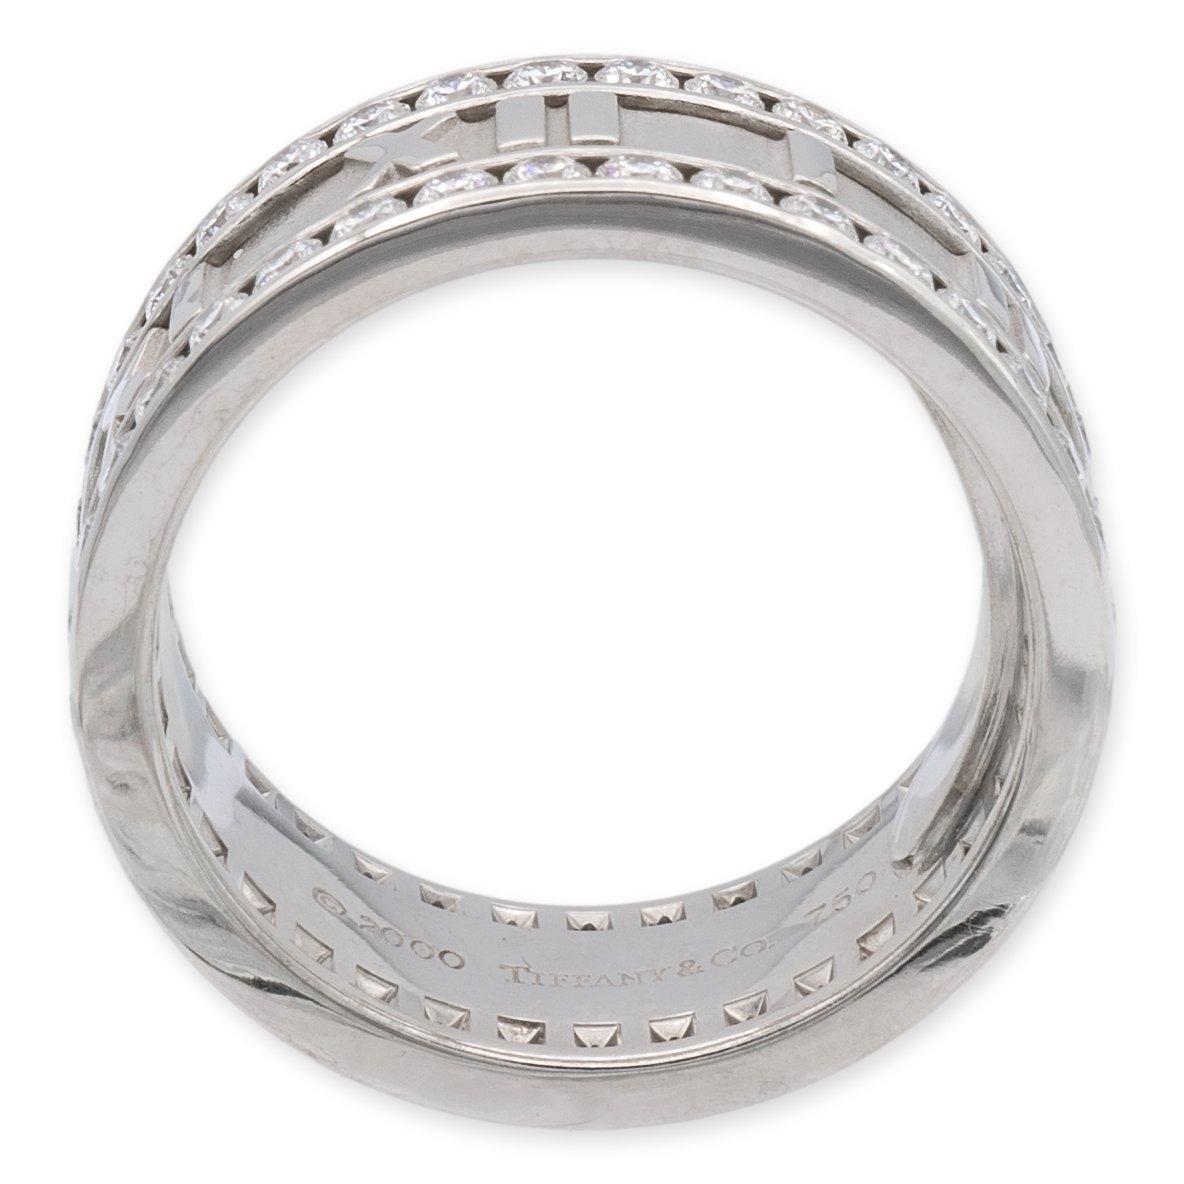 85mm ring size